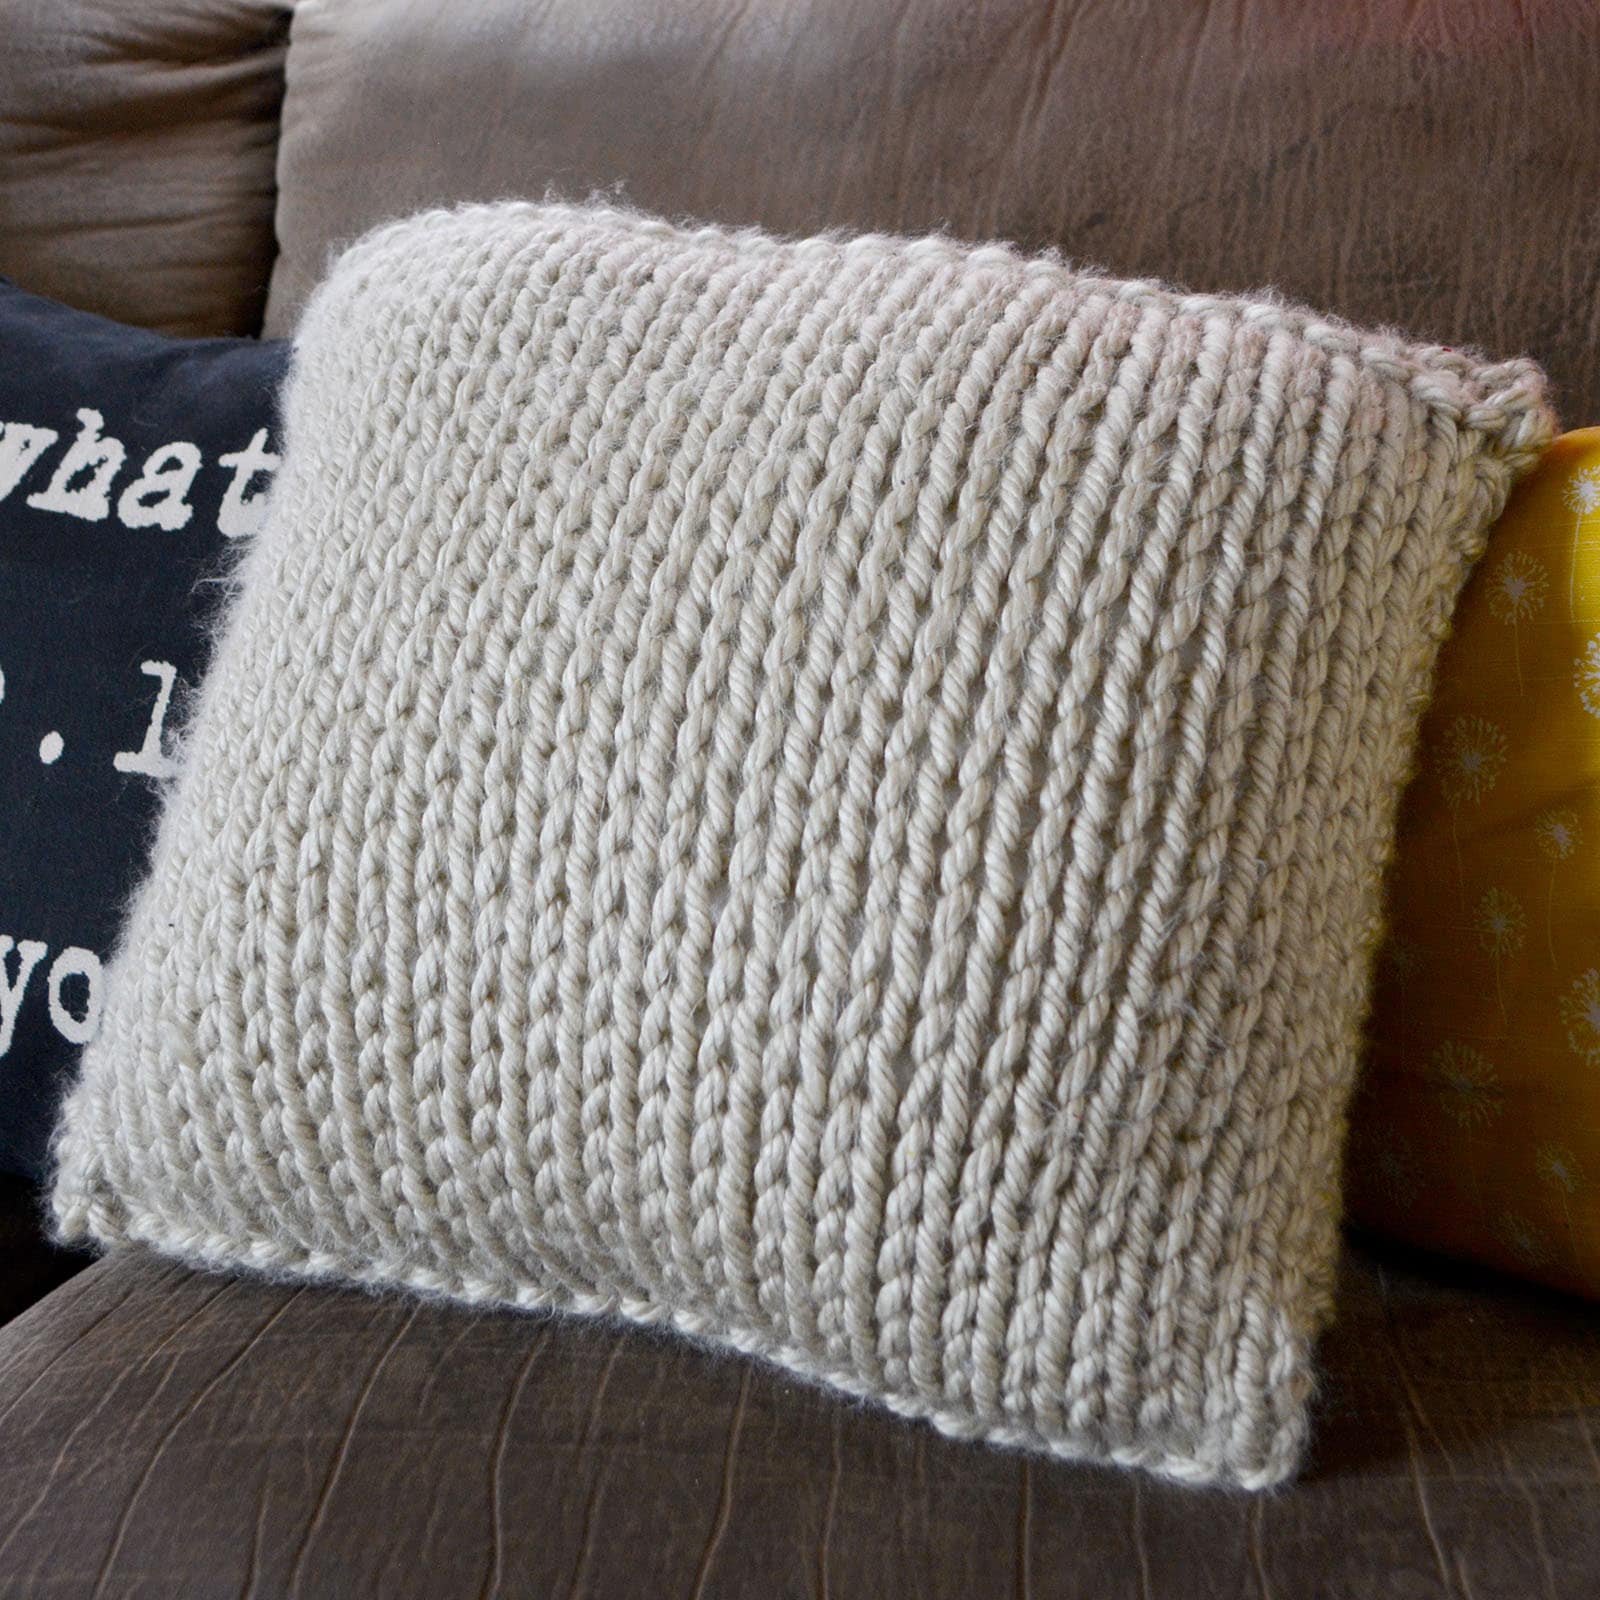 Bungee Ribbed Pillow - Square, Patterns